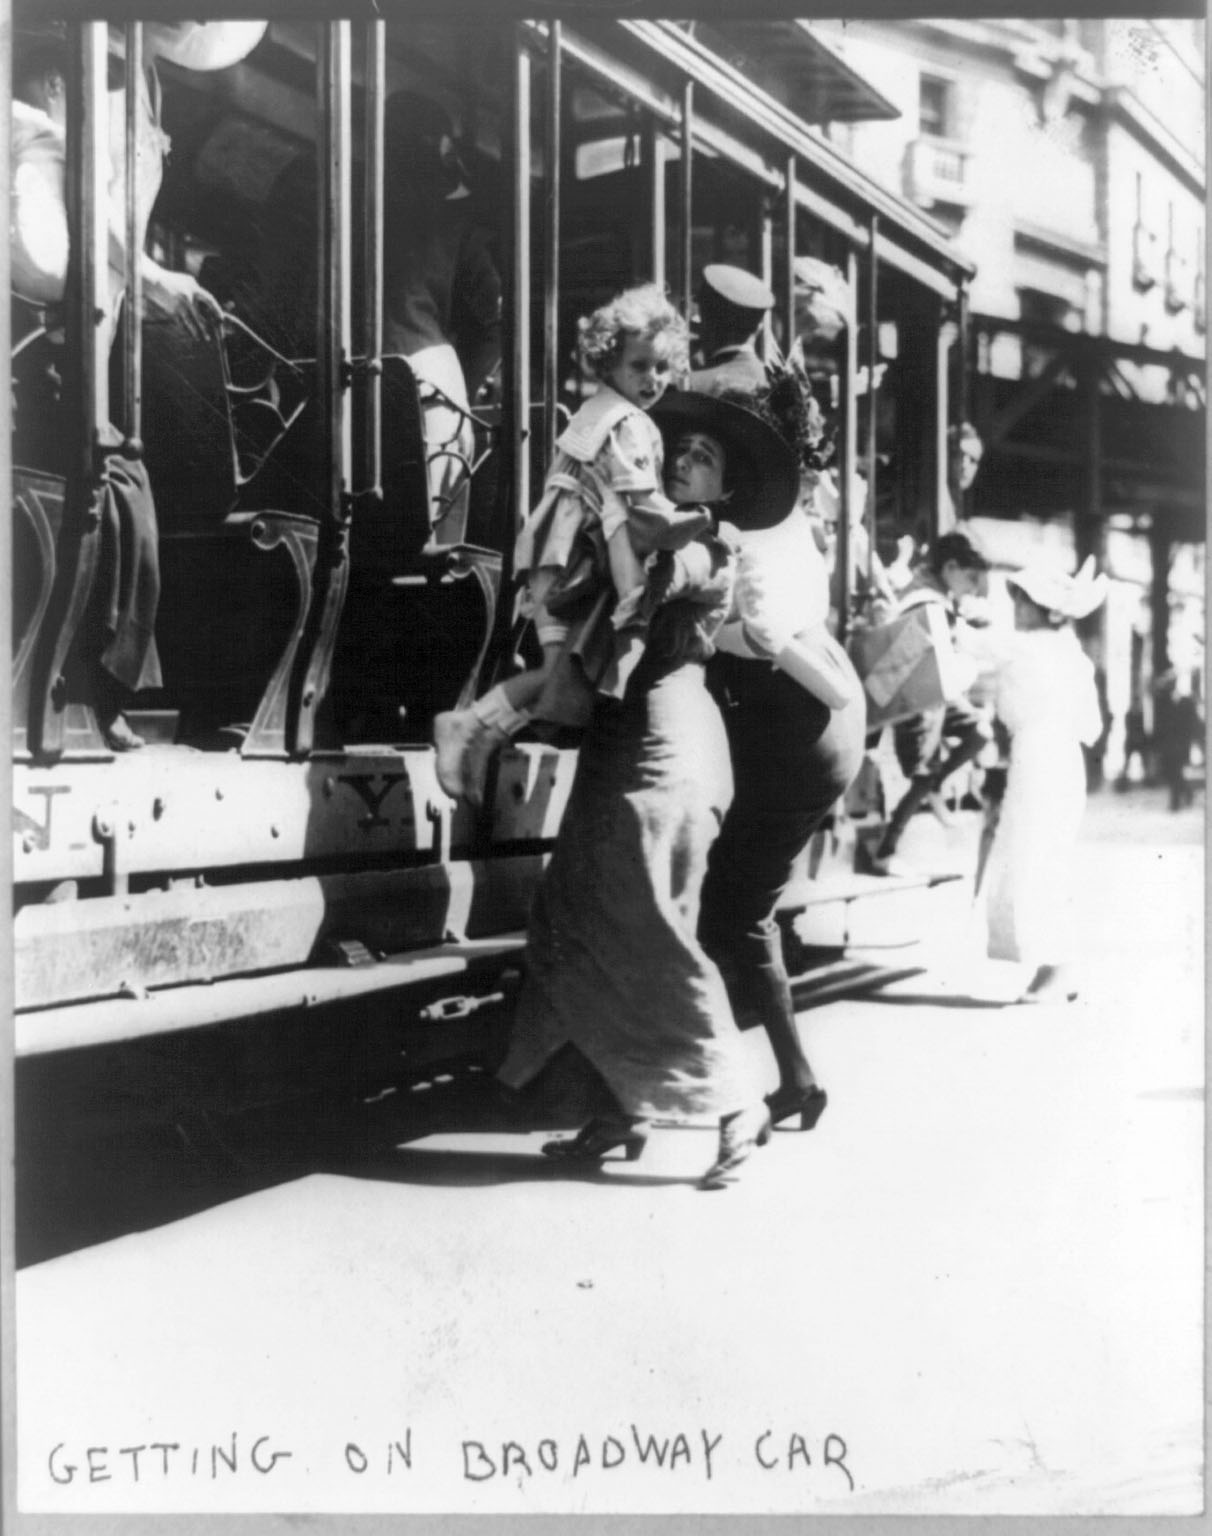 A women helps a child into a trolley car.